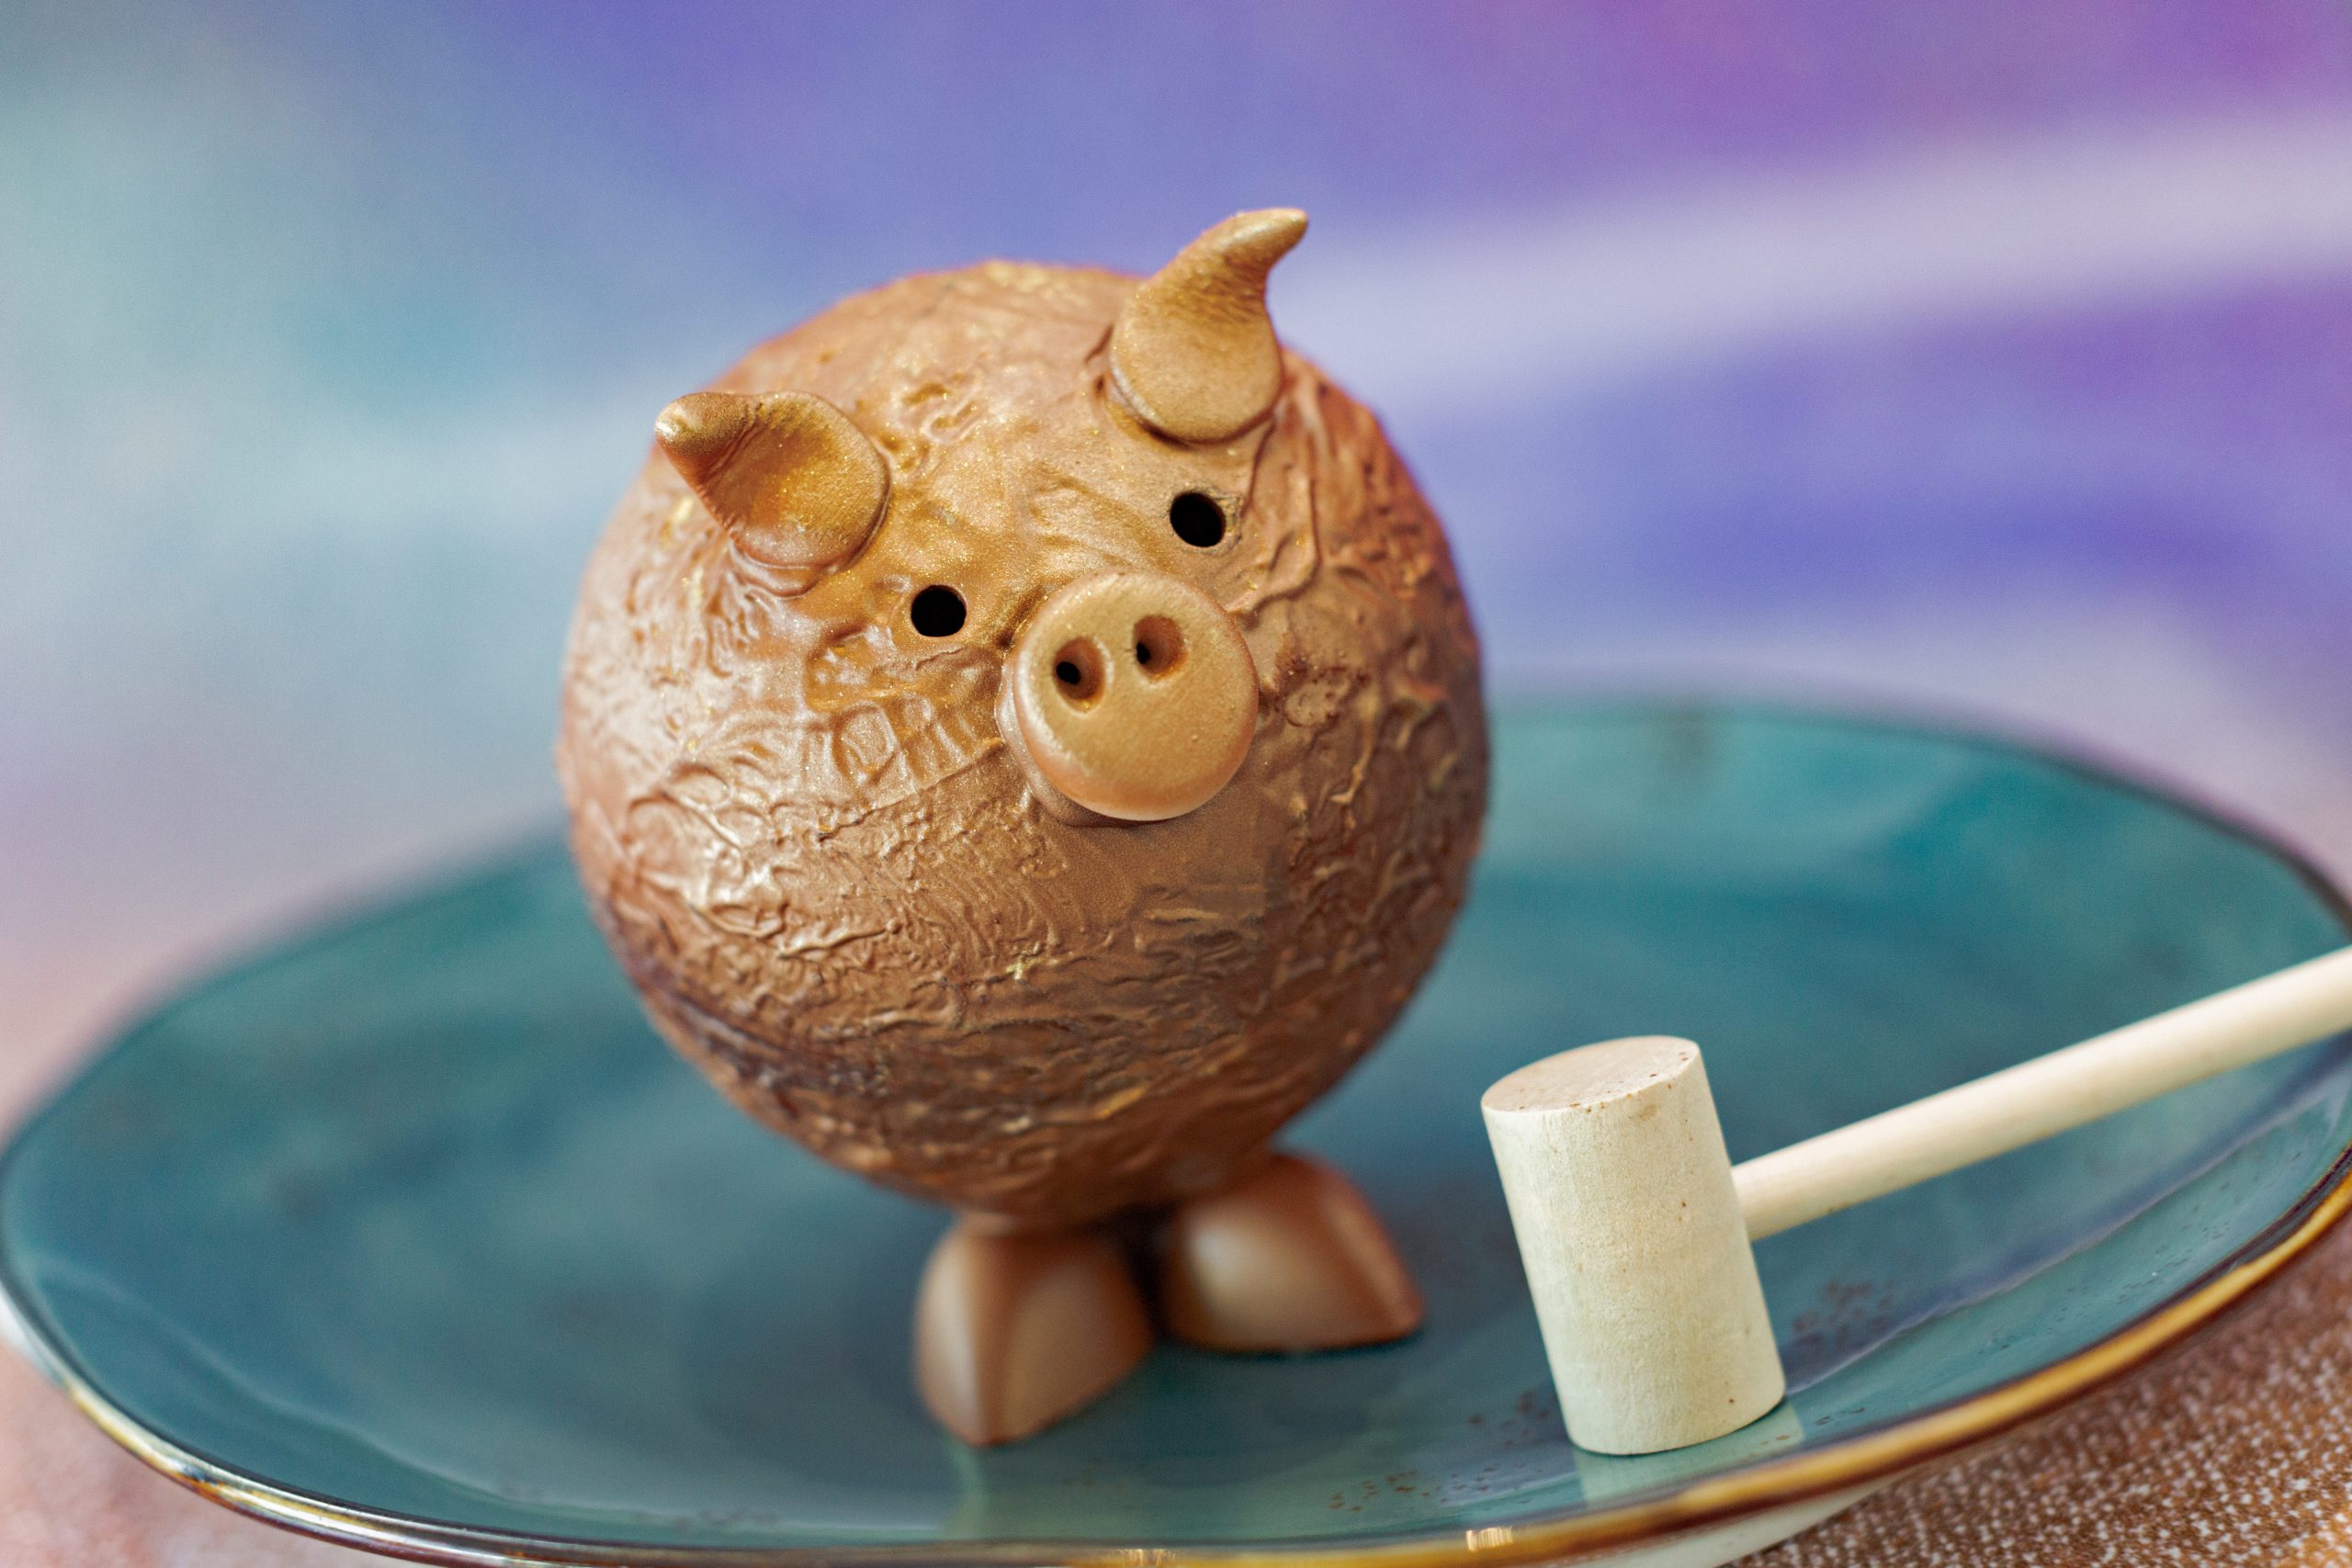 One of Disney's culinary creations, which is a small gold pig.